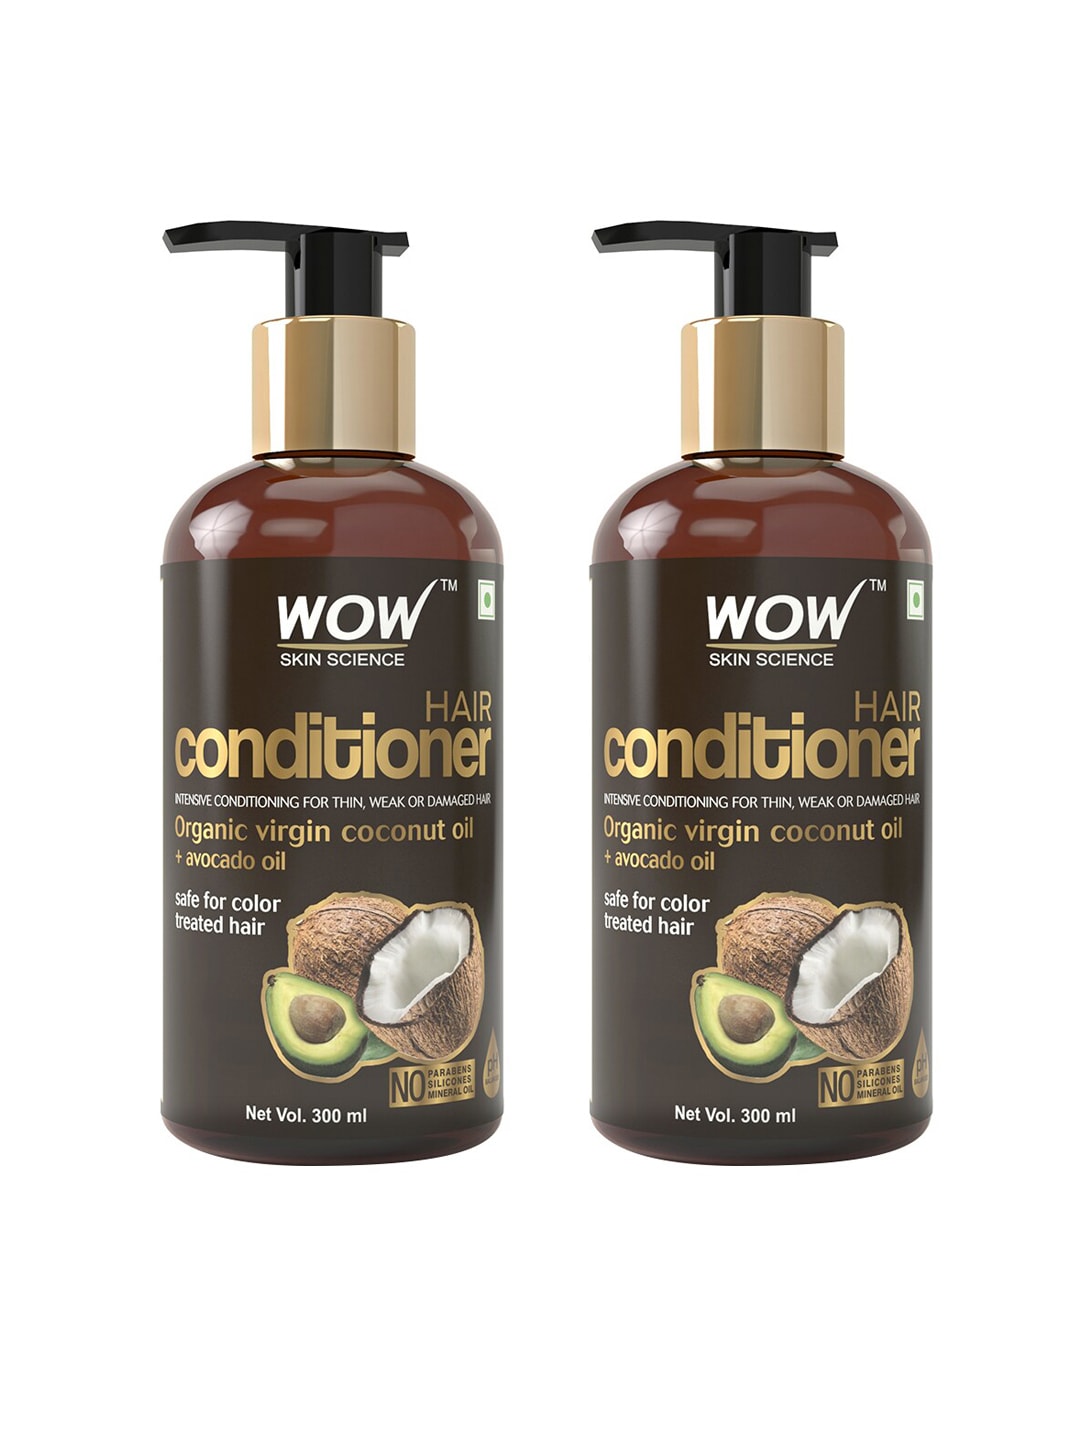 WOW SKIN SCIENCE Set of 2 Coconut Oil + Avocado Oil Hair Conditioner - 300 ml each Price in India